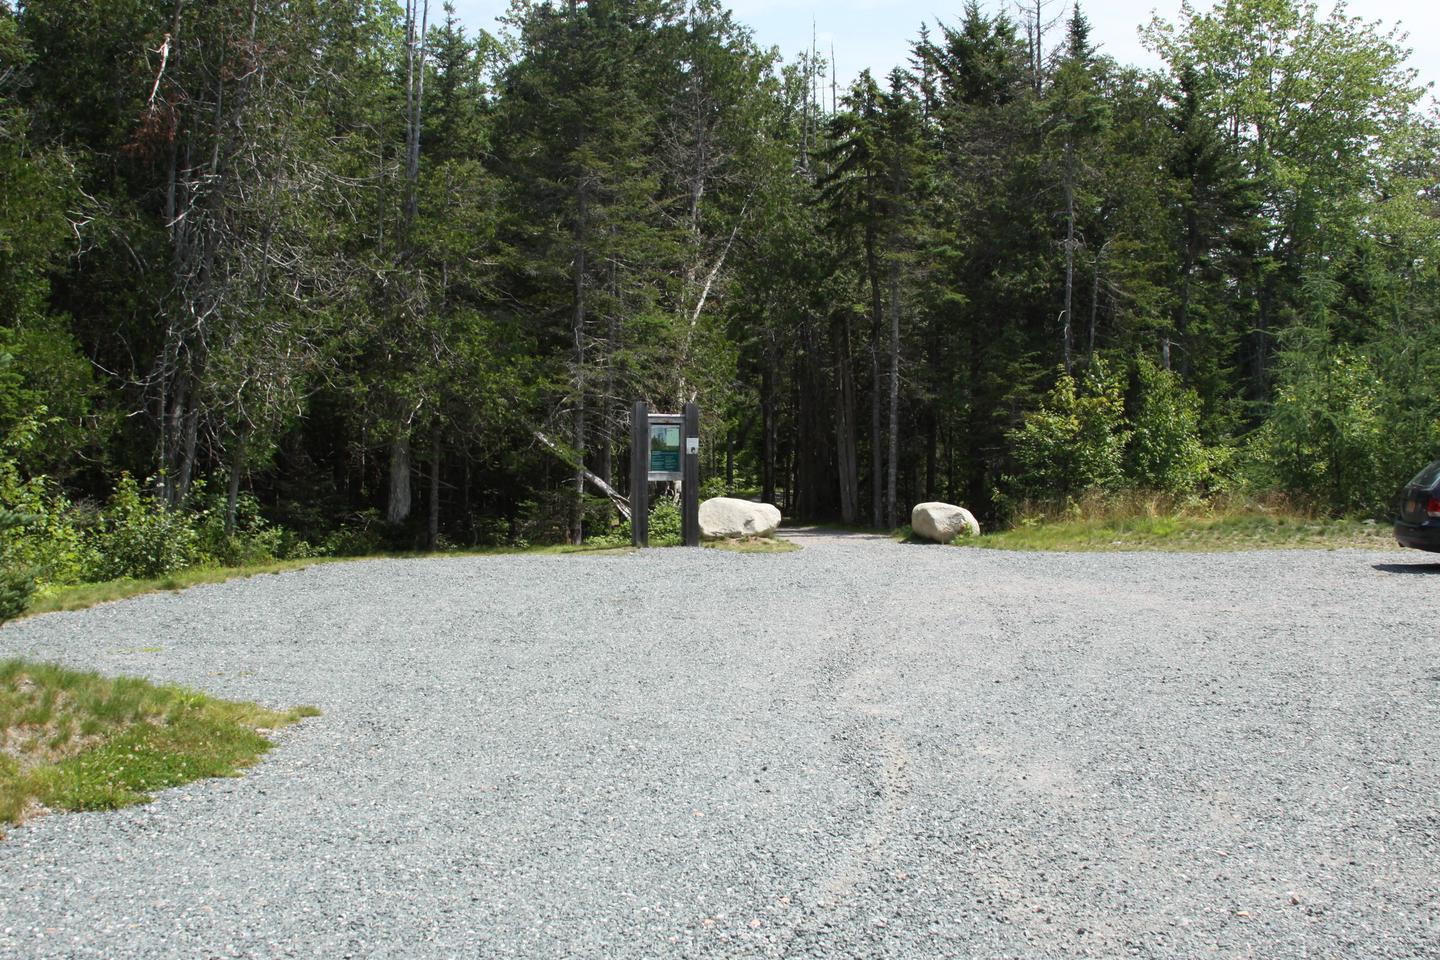 Gravel parking lot surrounded by spruce and pine trees.Parking lot for hike-in campsites